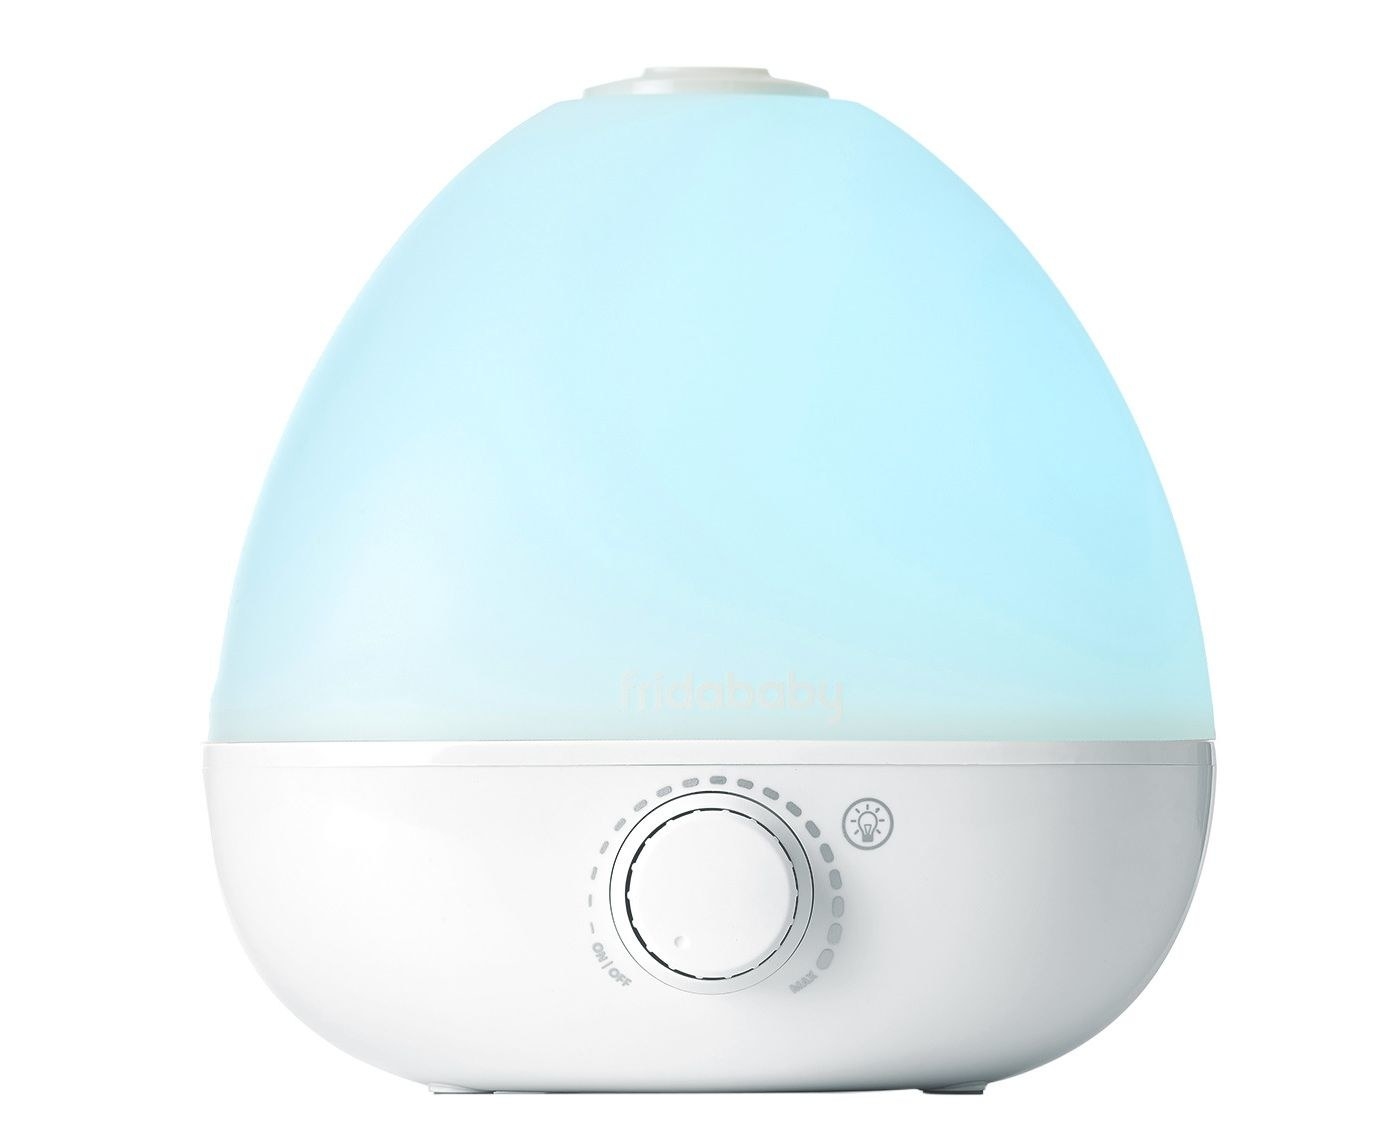 The humidifier, which has an almost egg shape, and a small dial on the front